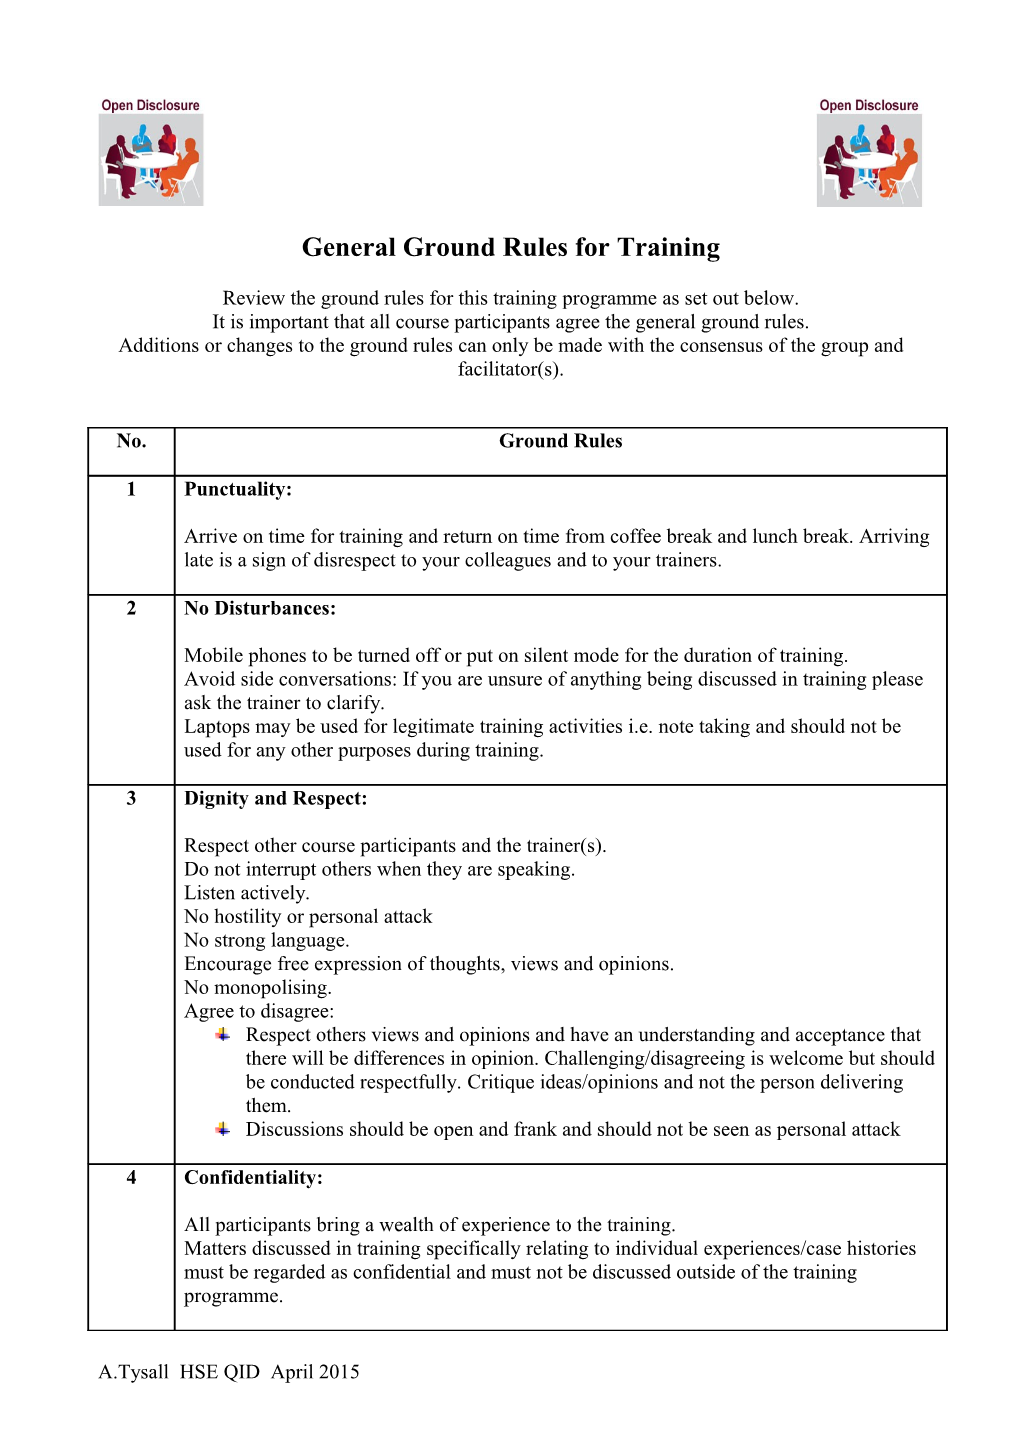 General Ground Rules for Training